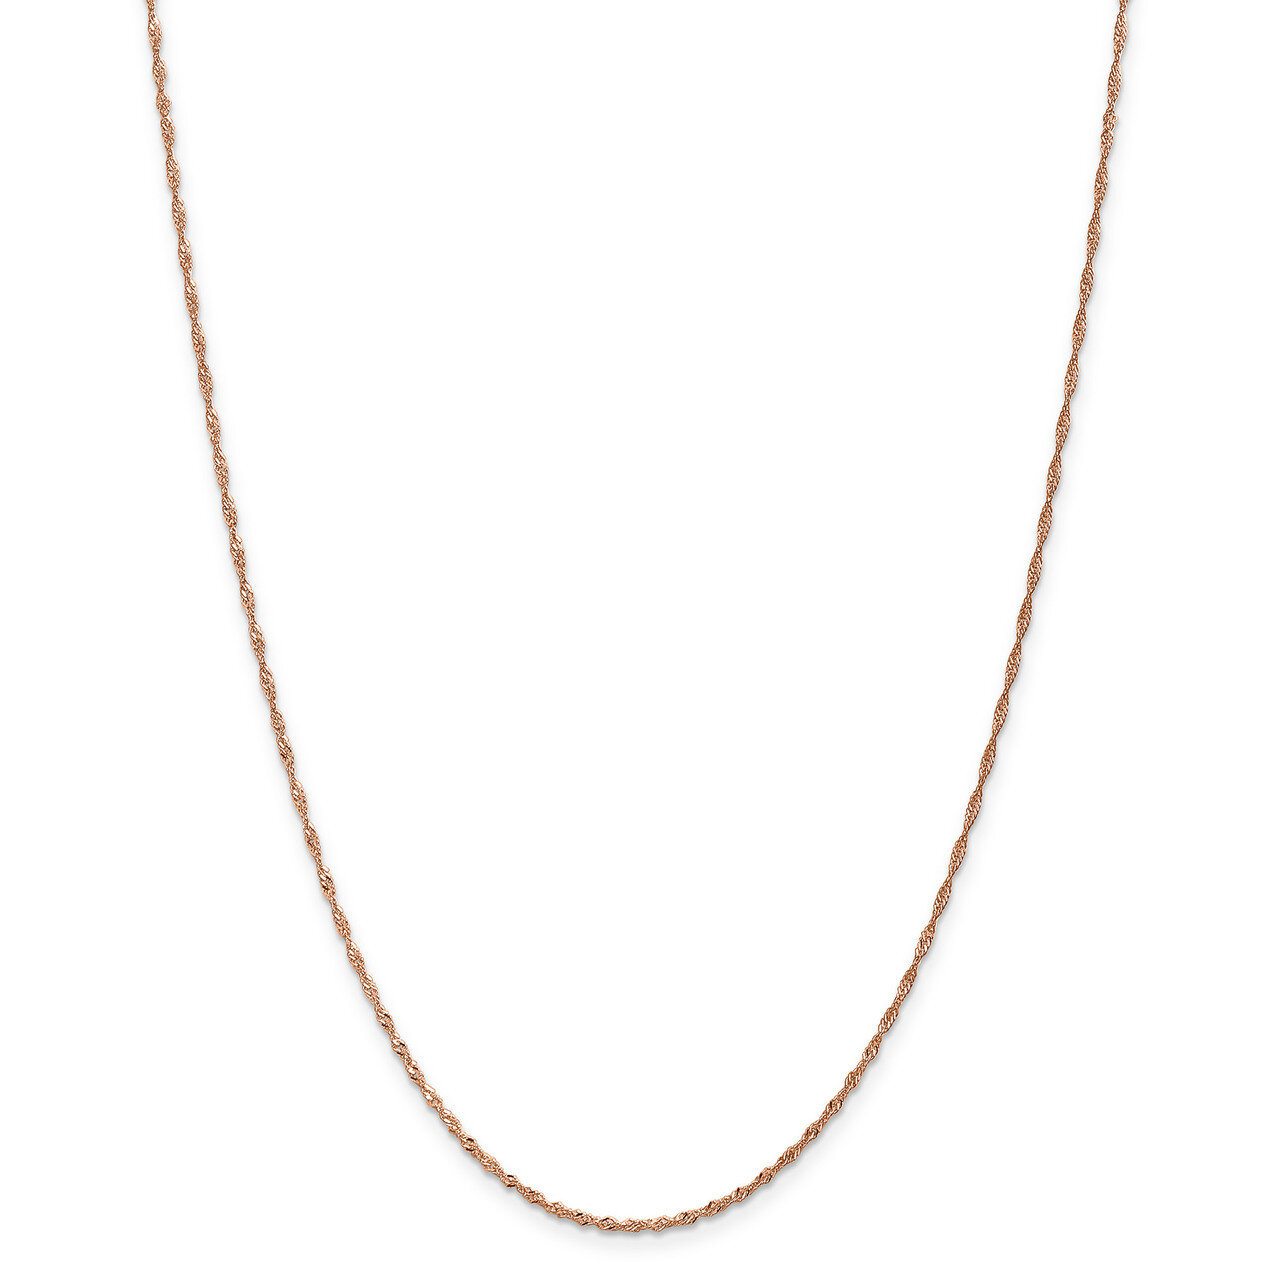 1 mm Singapore Chain 20 Inch 14k Rose Gold HB-7164-20